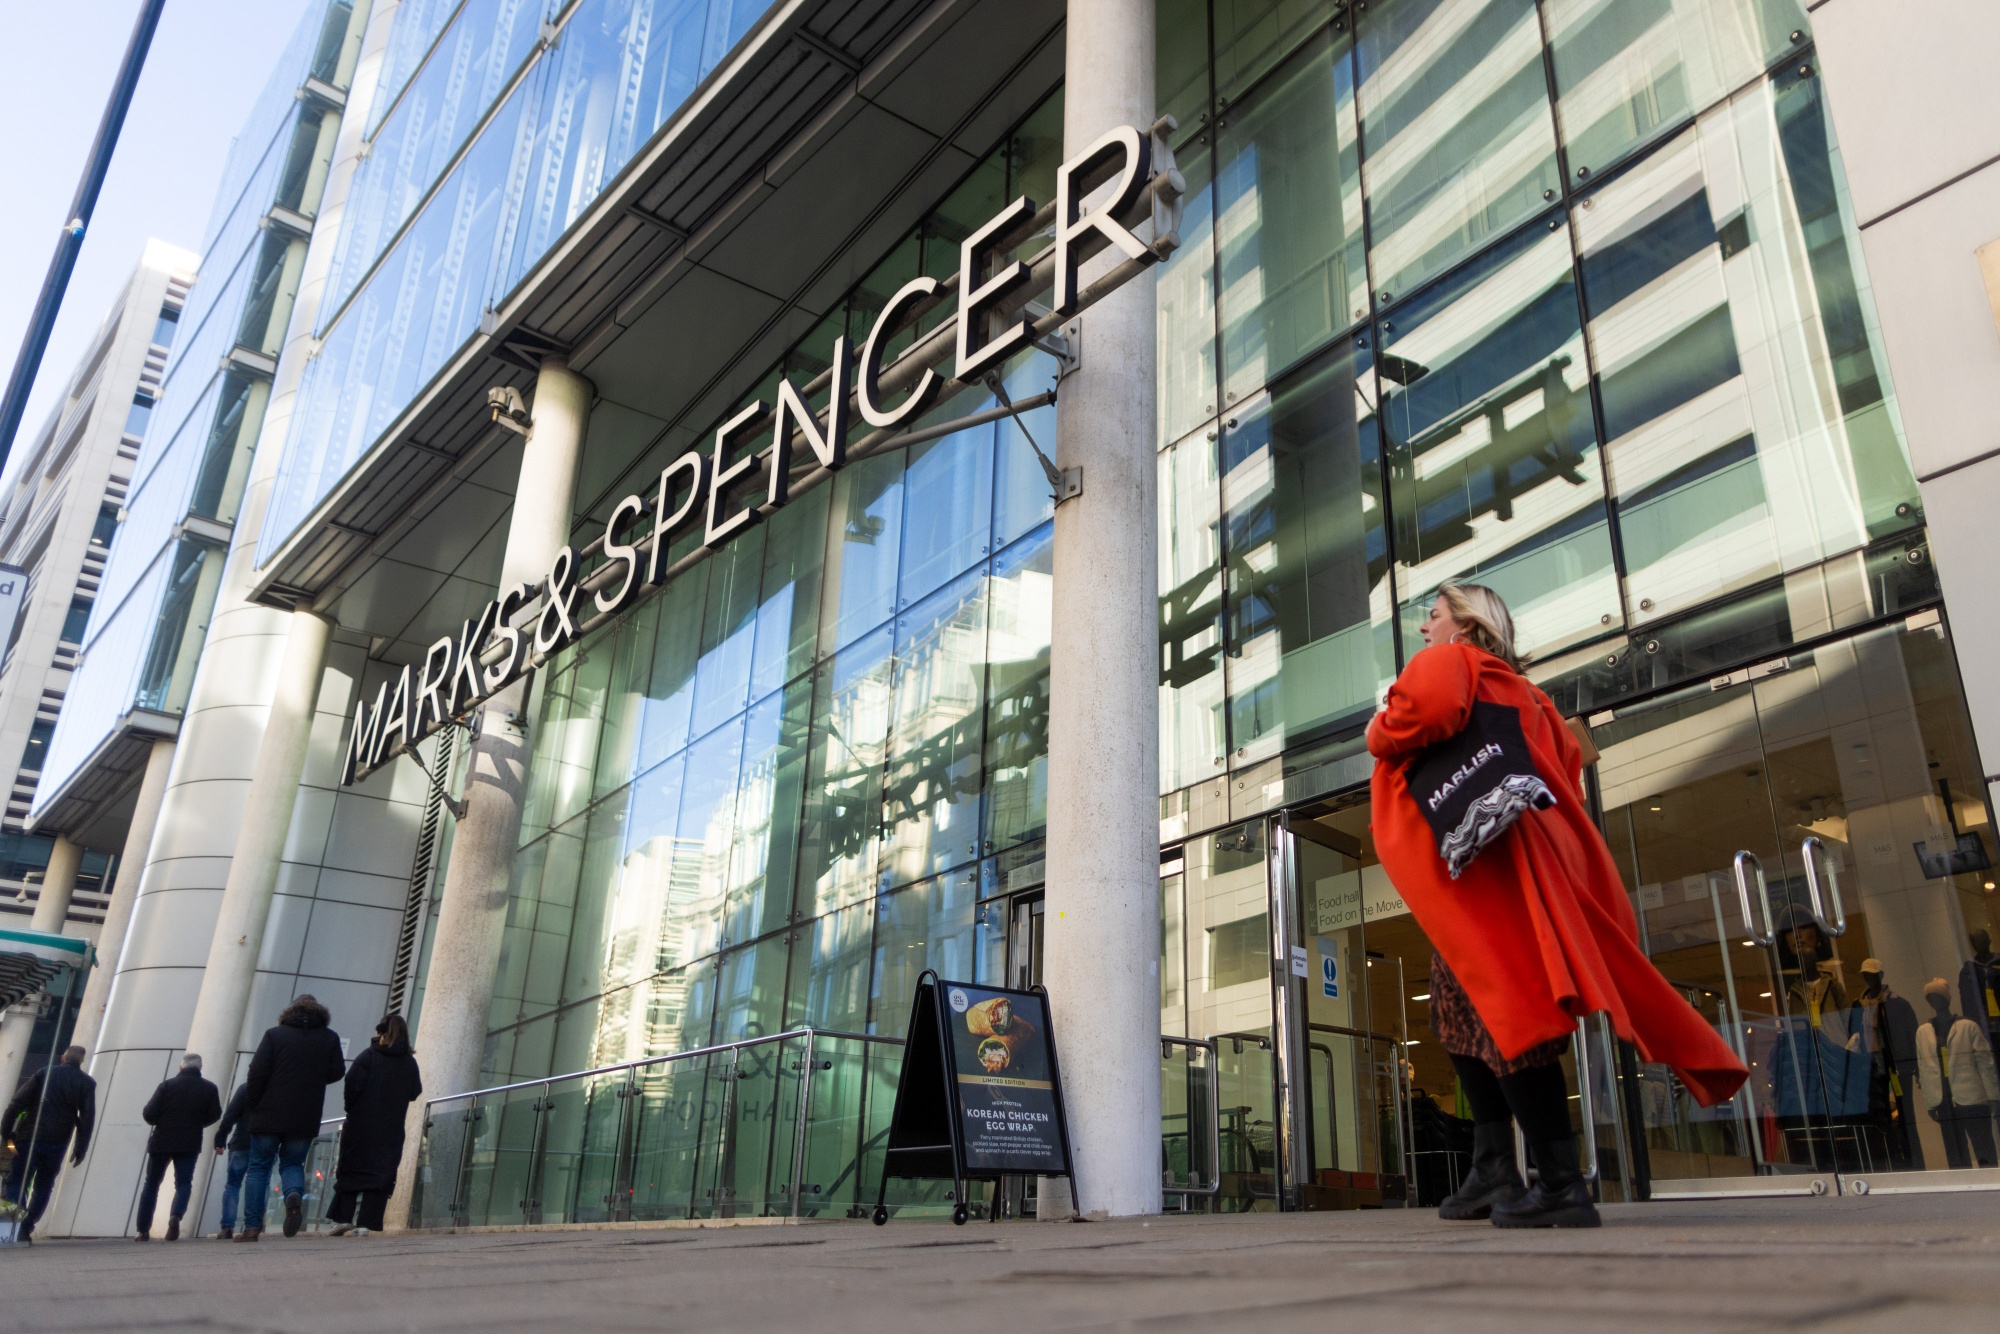 Marks & Spencer plans to grow high street brand offer to compete